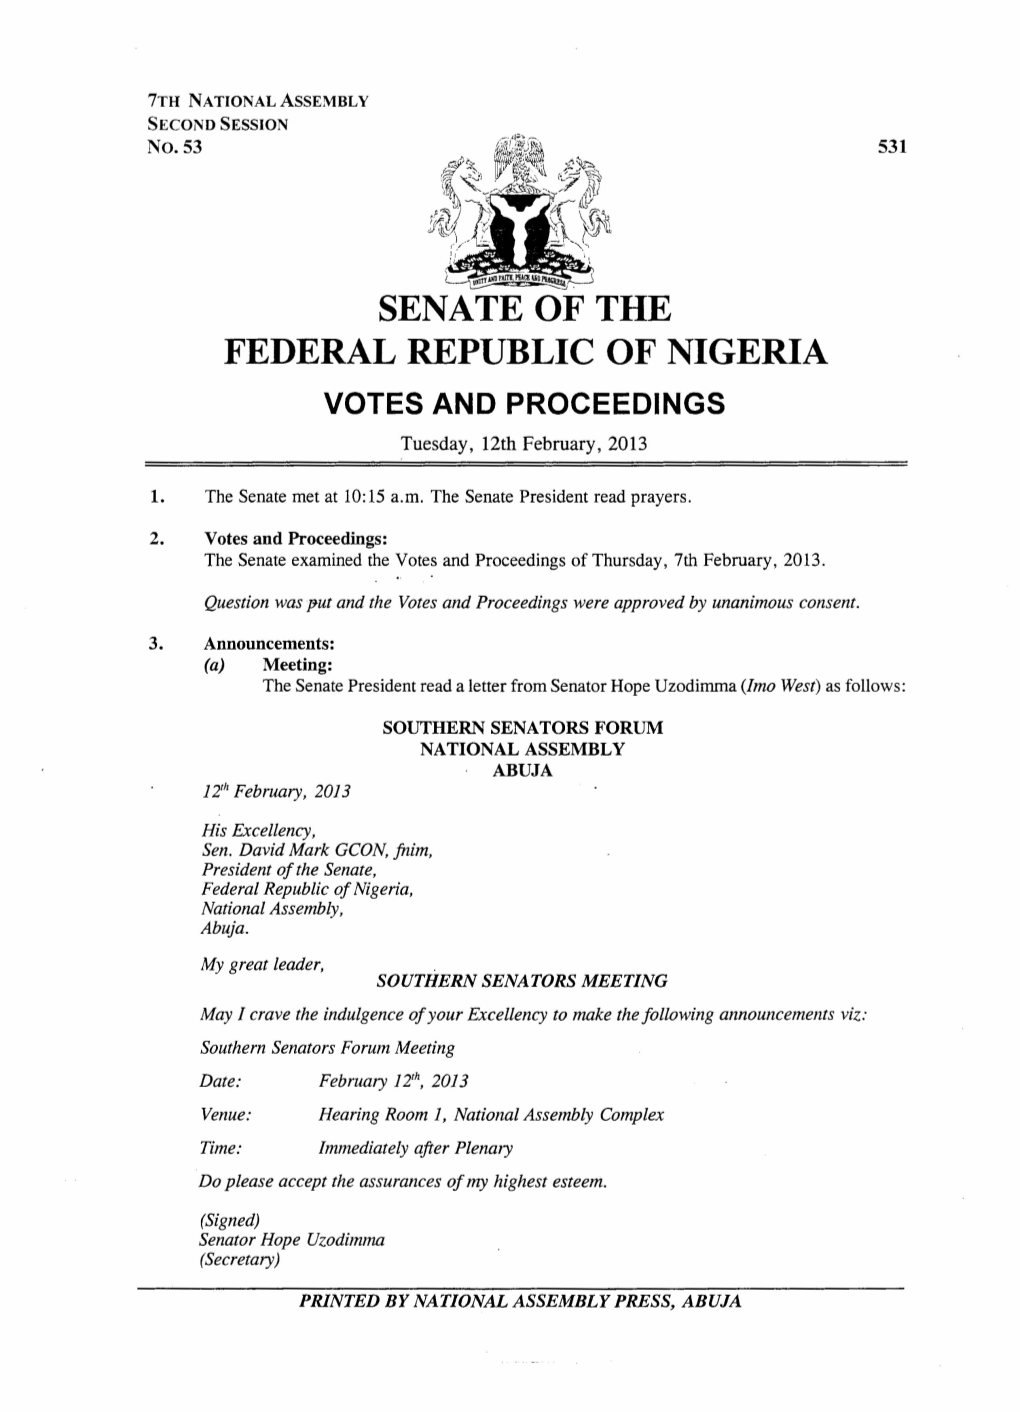 SENATE of the FEDERAL REPUBLIC of NIGERIA VOTES and PROCEEDINGS Tuesday, 12Th February, 2013